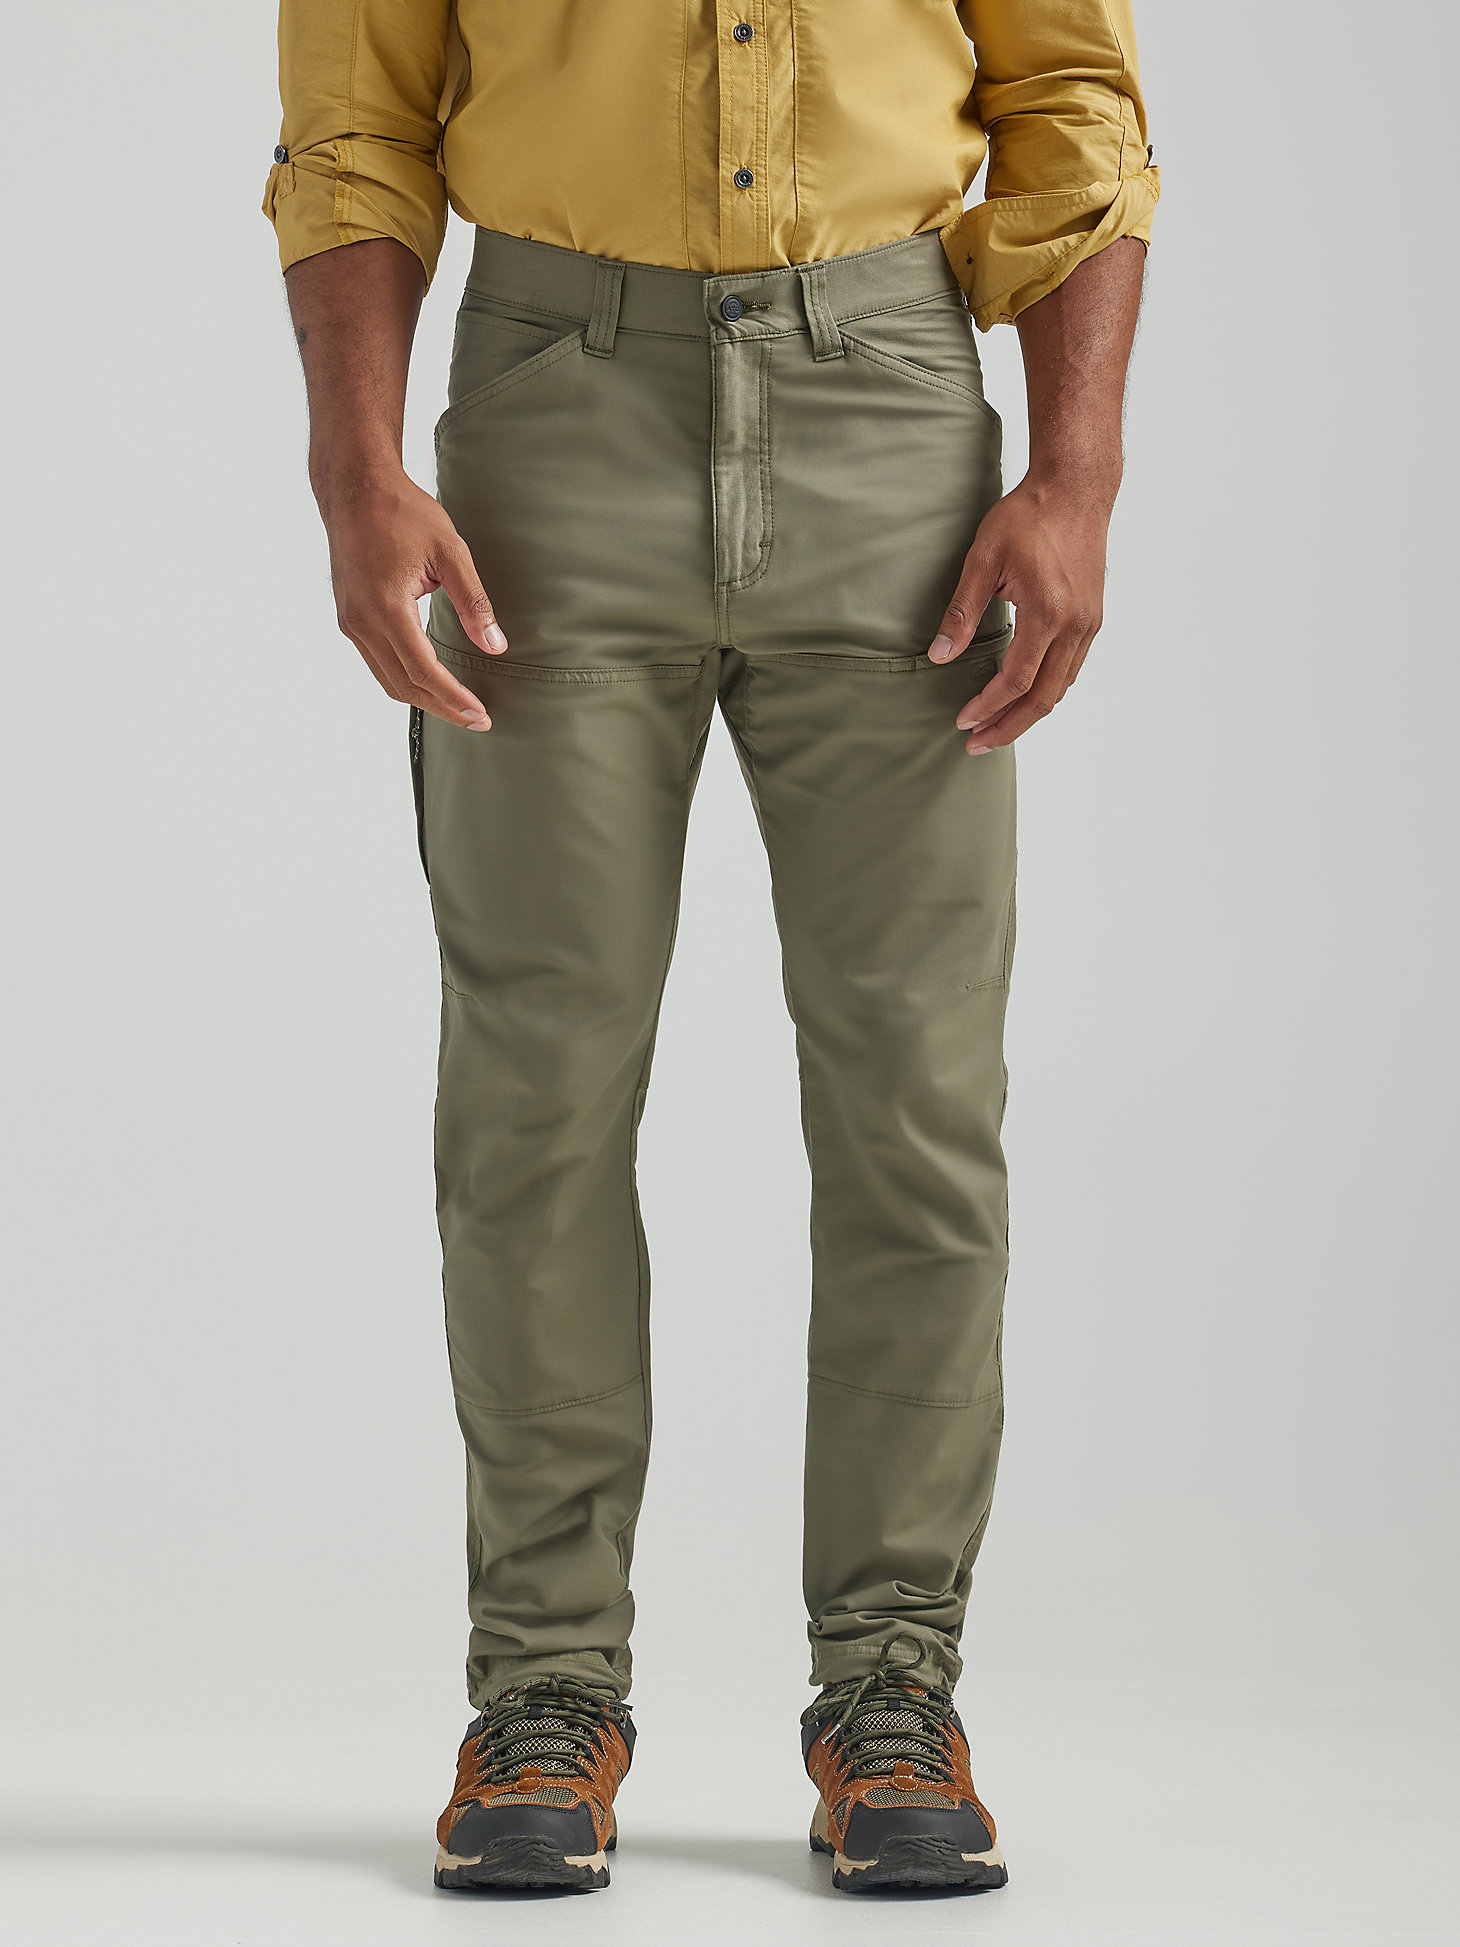 Rugged Trail Jogger in Dusty Olive main view